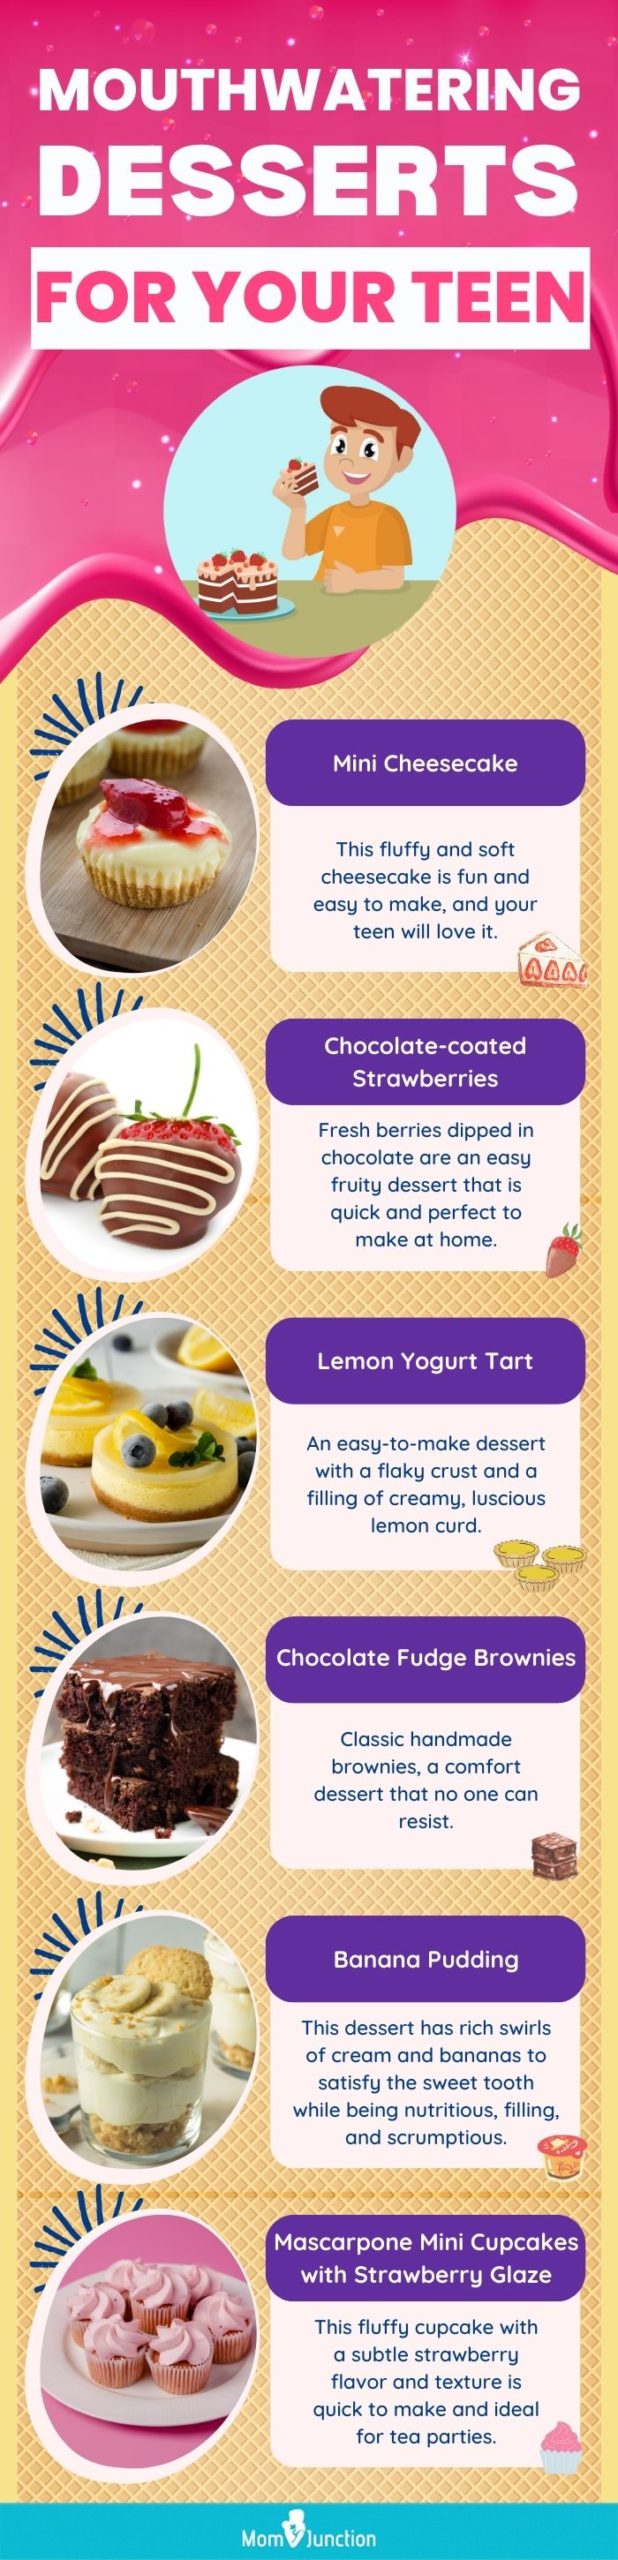 mouthwatering desserts for your teen (infographic)